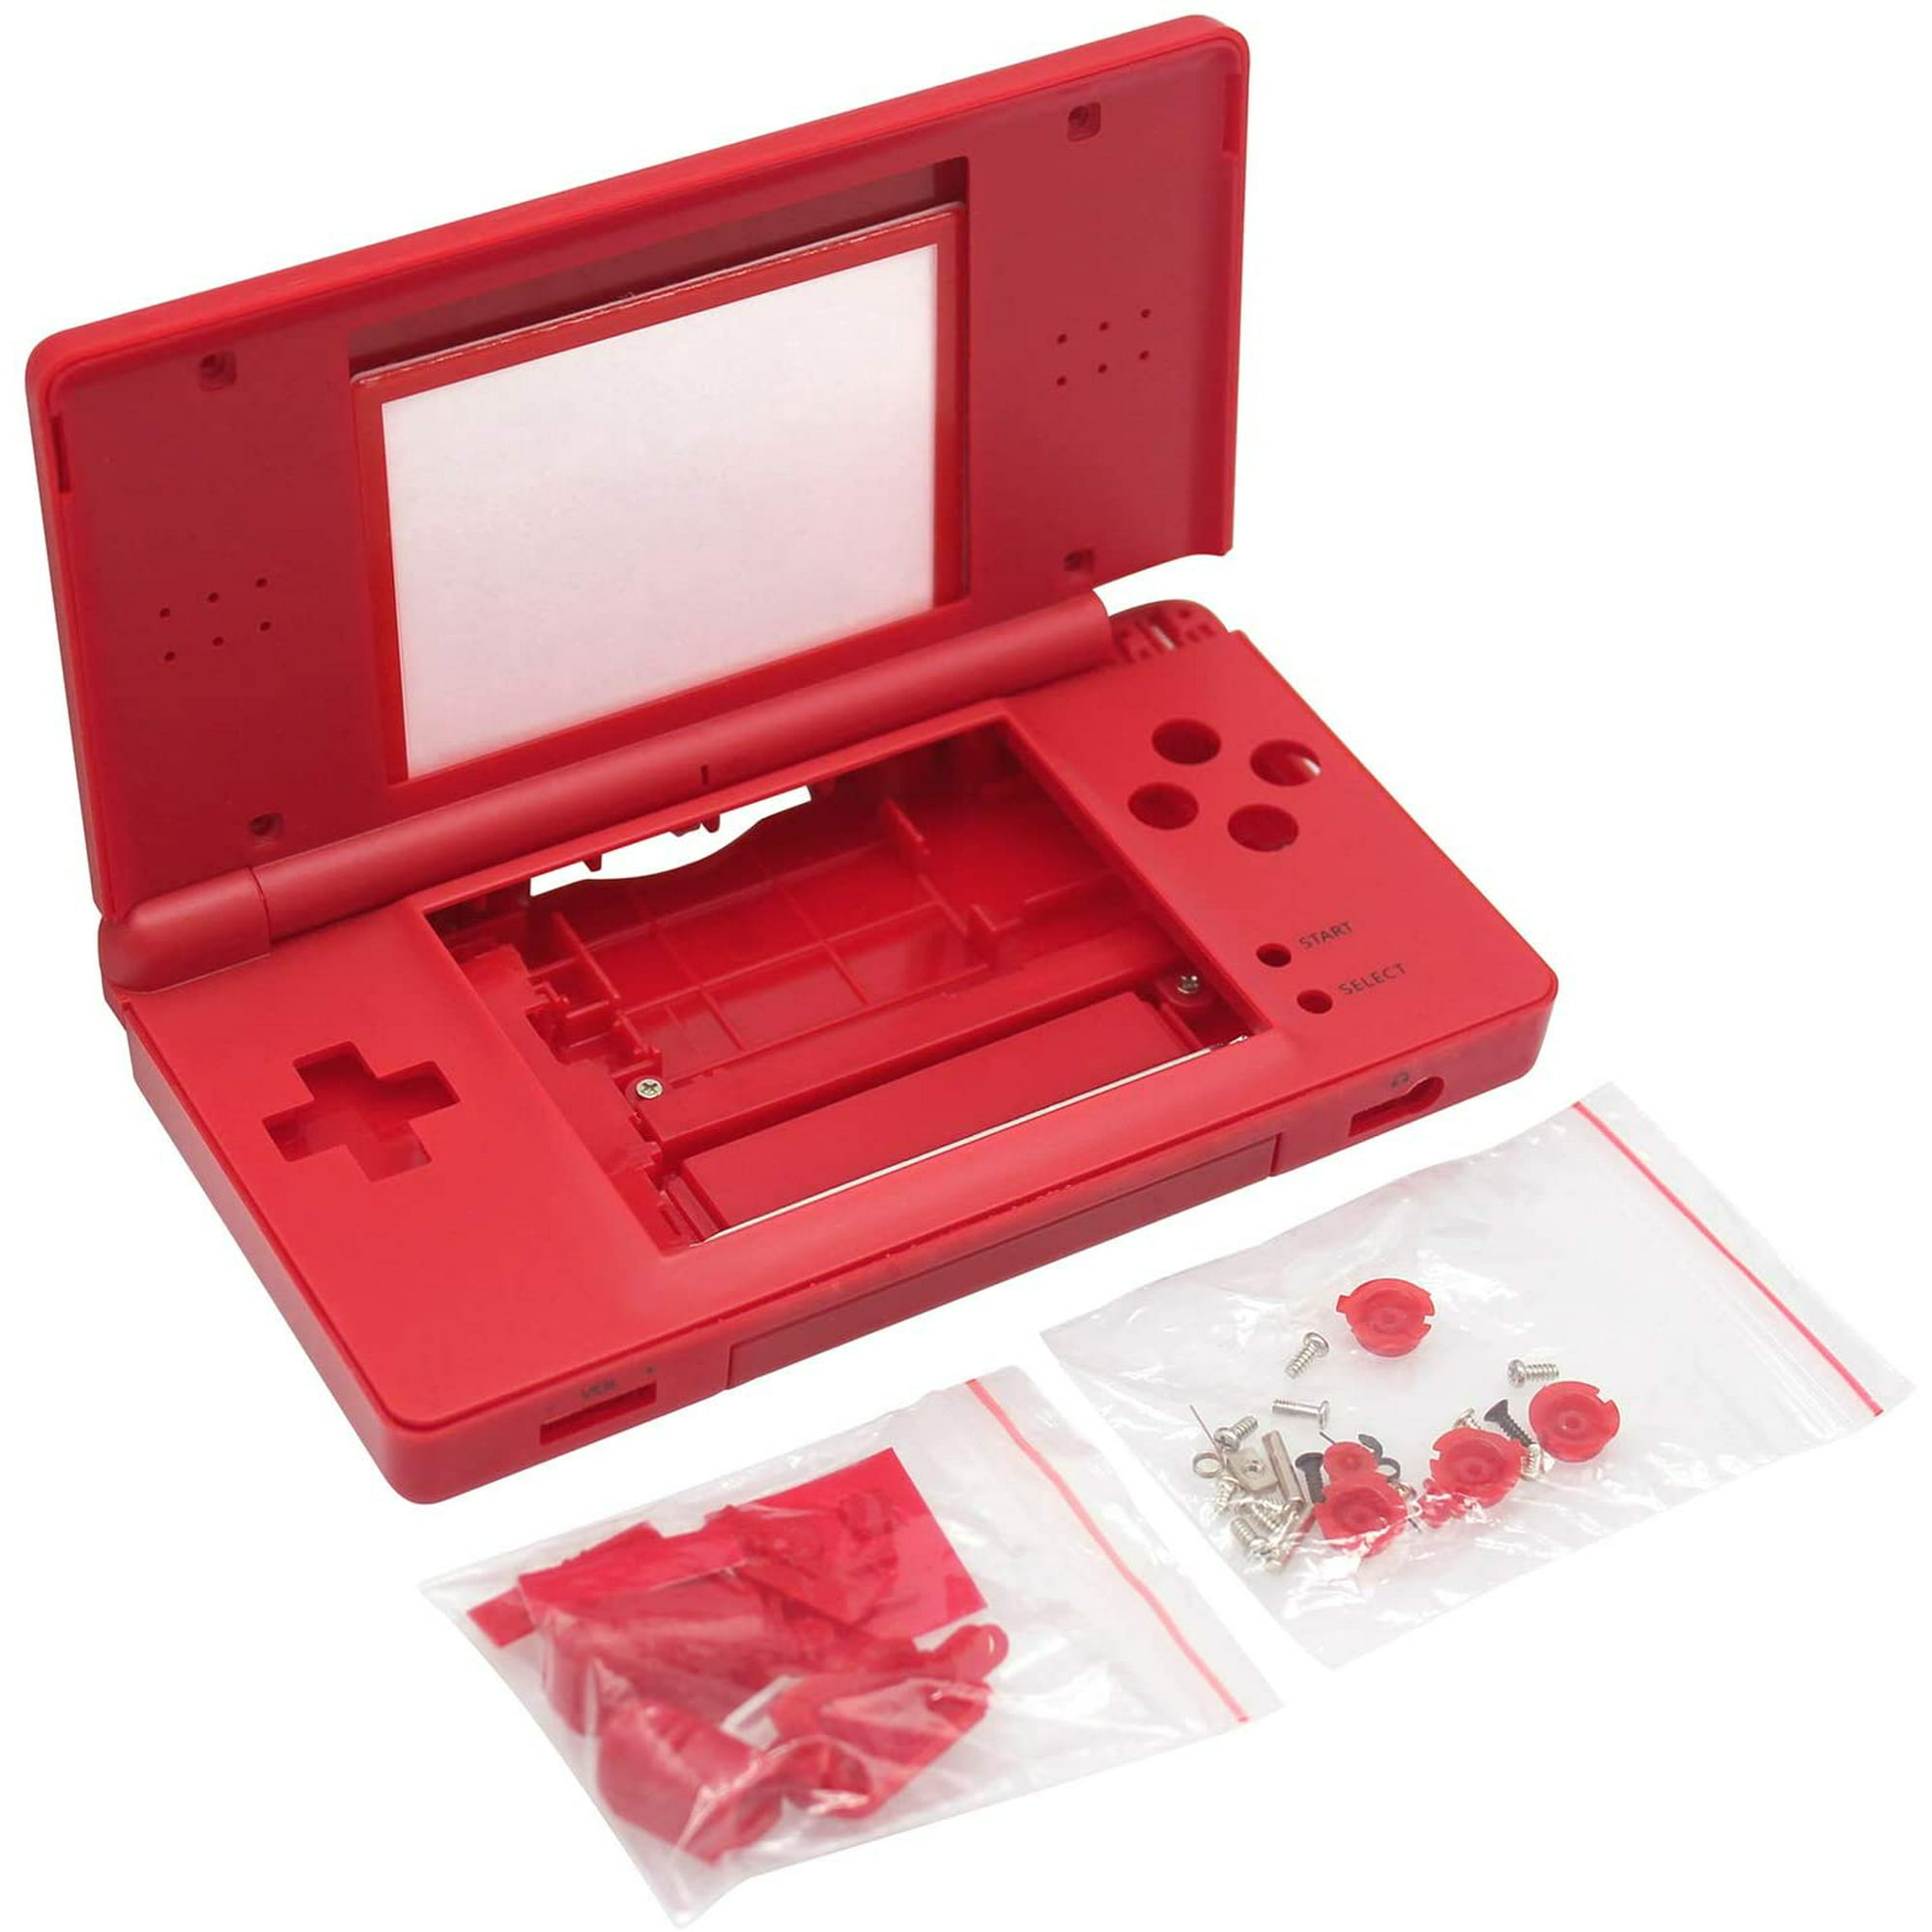 Full Parts Replacement Housing Shell Case Kit Compatible for Nintendo DS NDSL Style Color Red | Walmart Canada